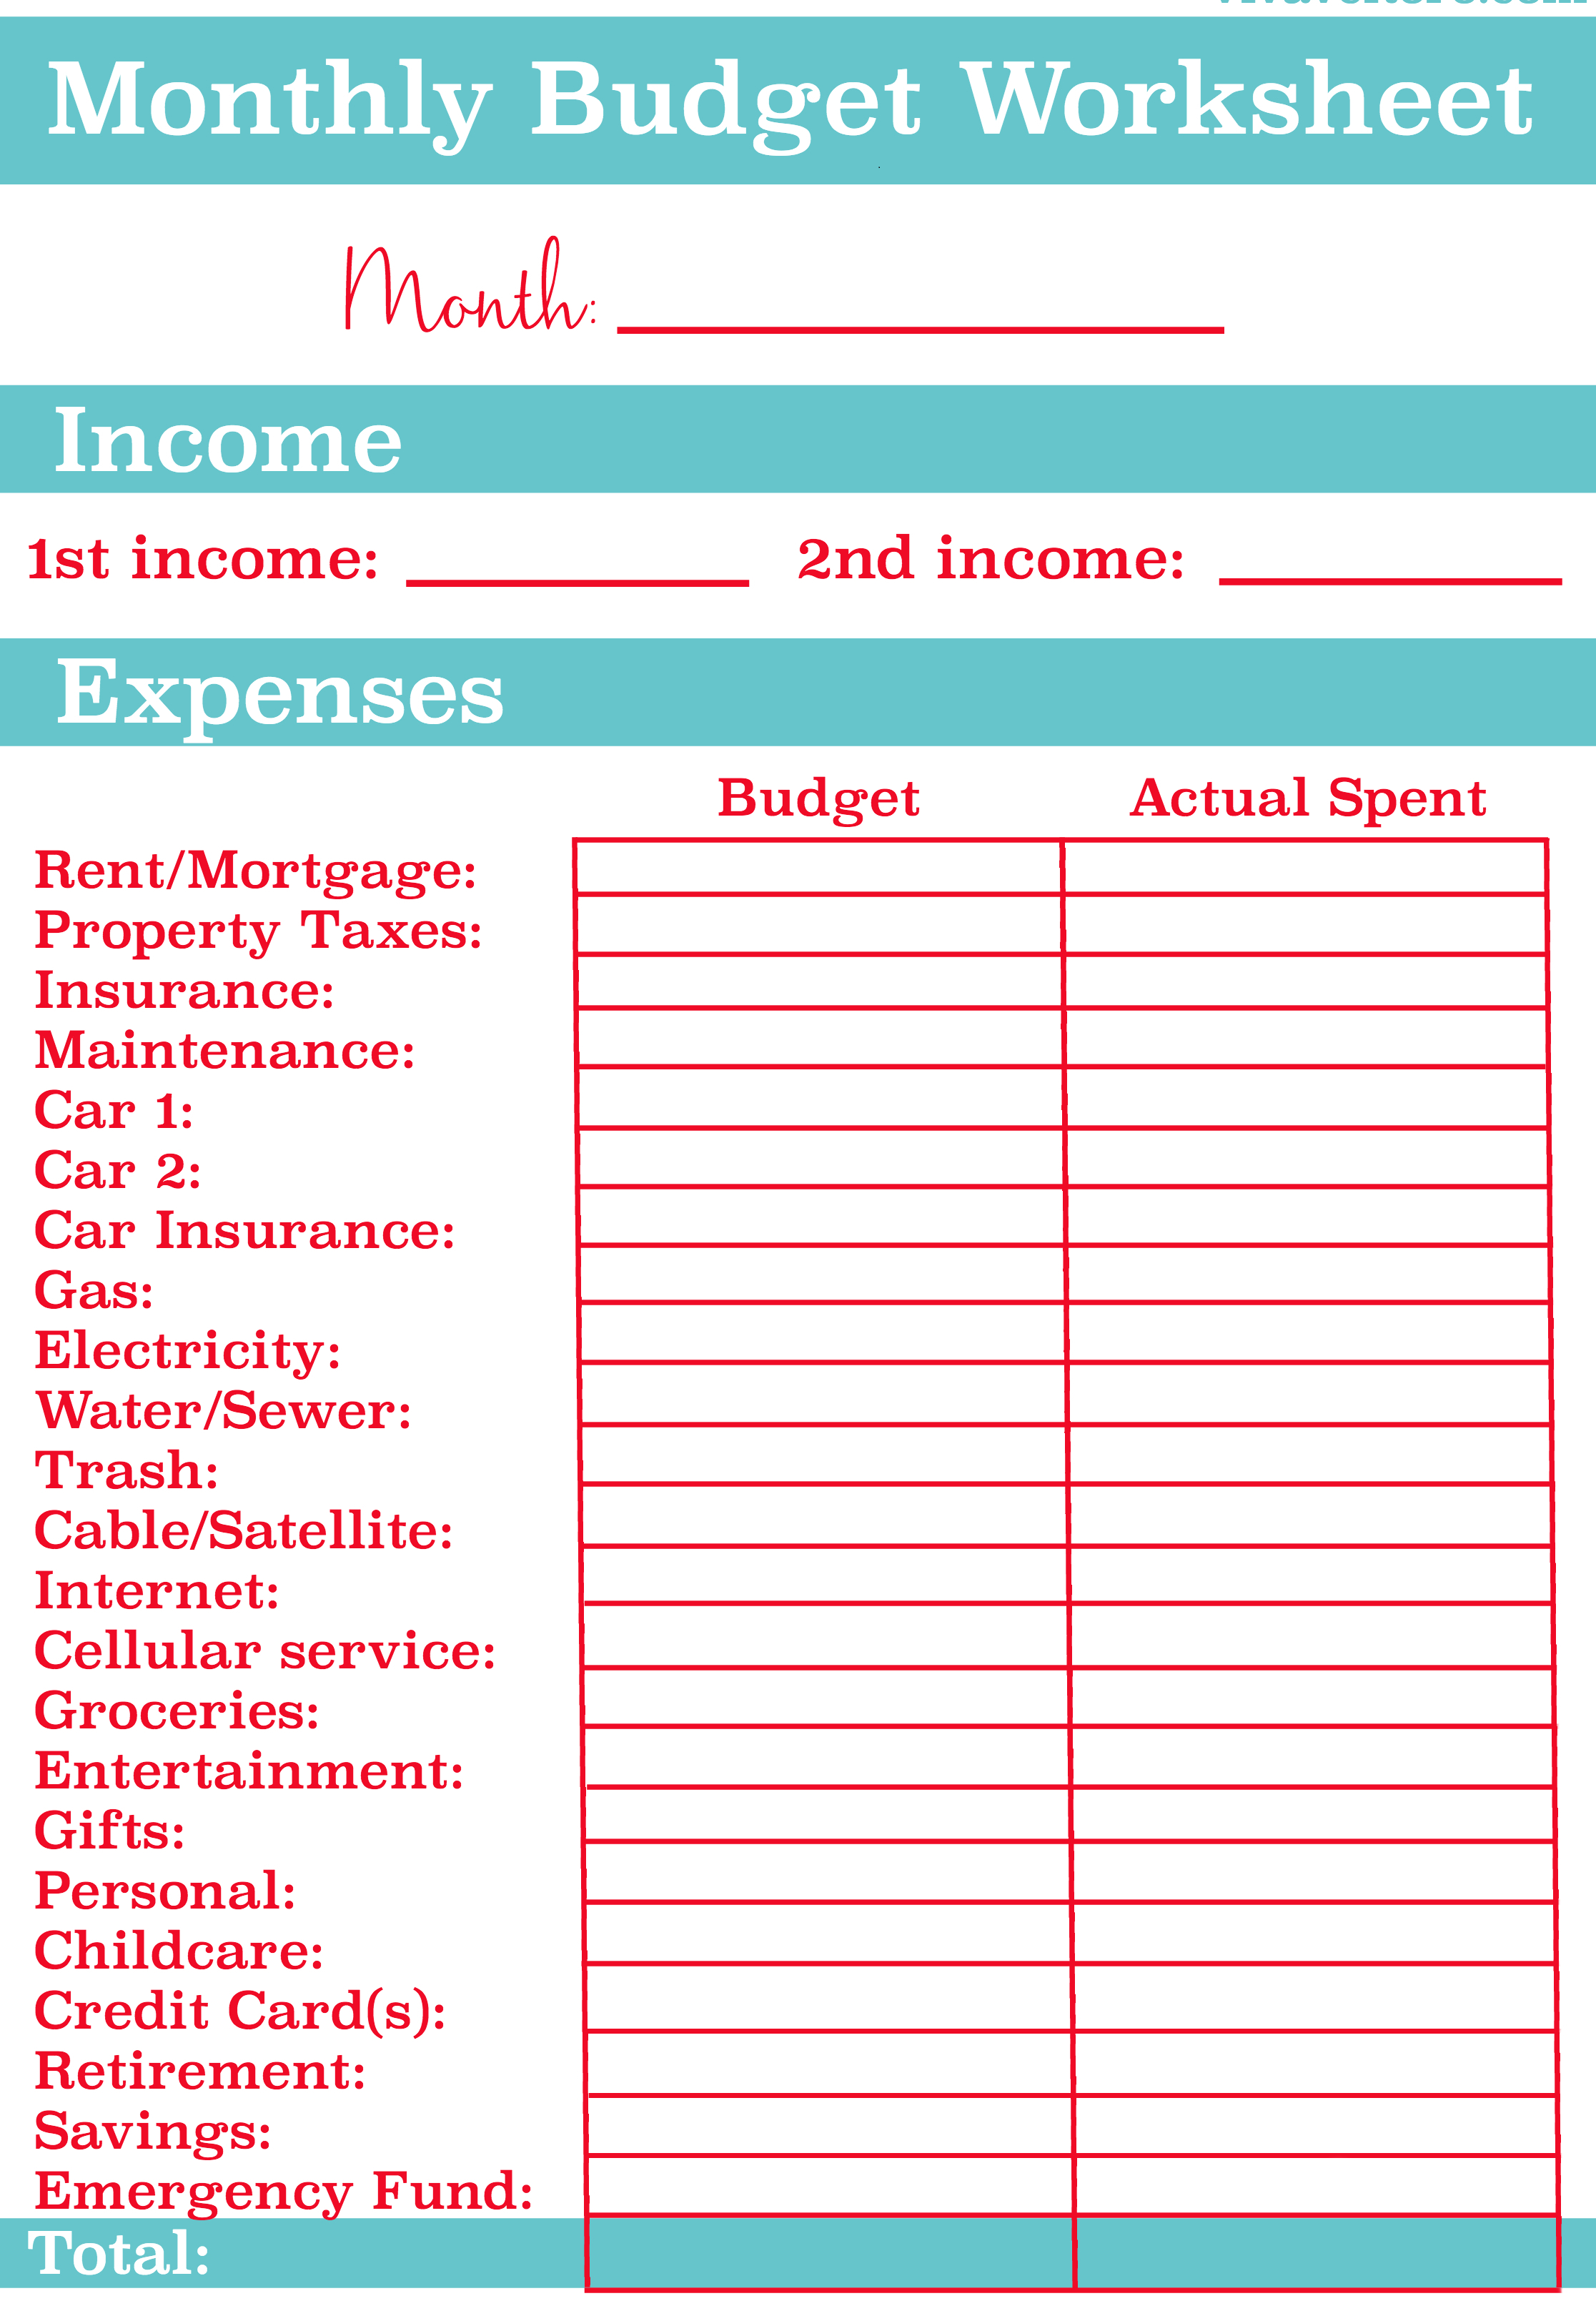 Free Personal Budget Template Download - Resourcesaver inside Personal Budget Spreadsheets